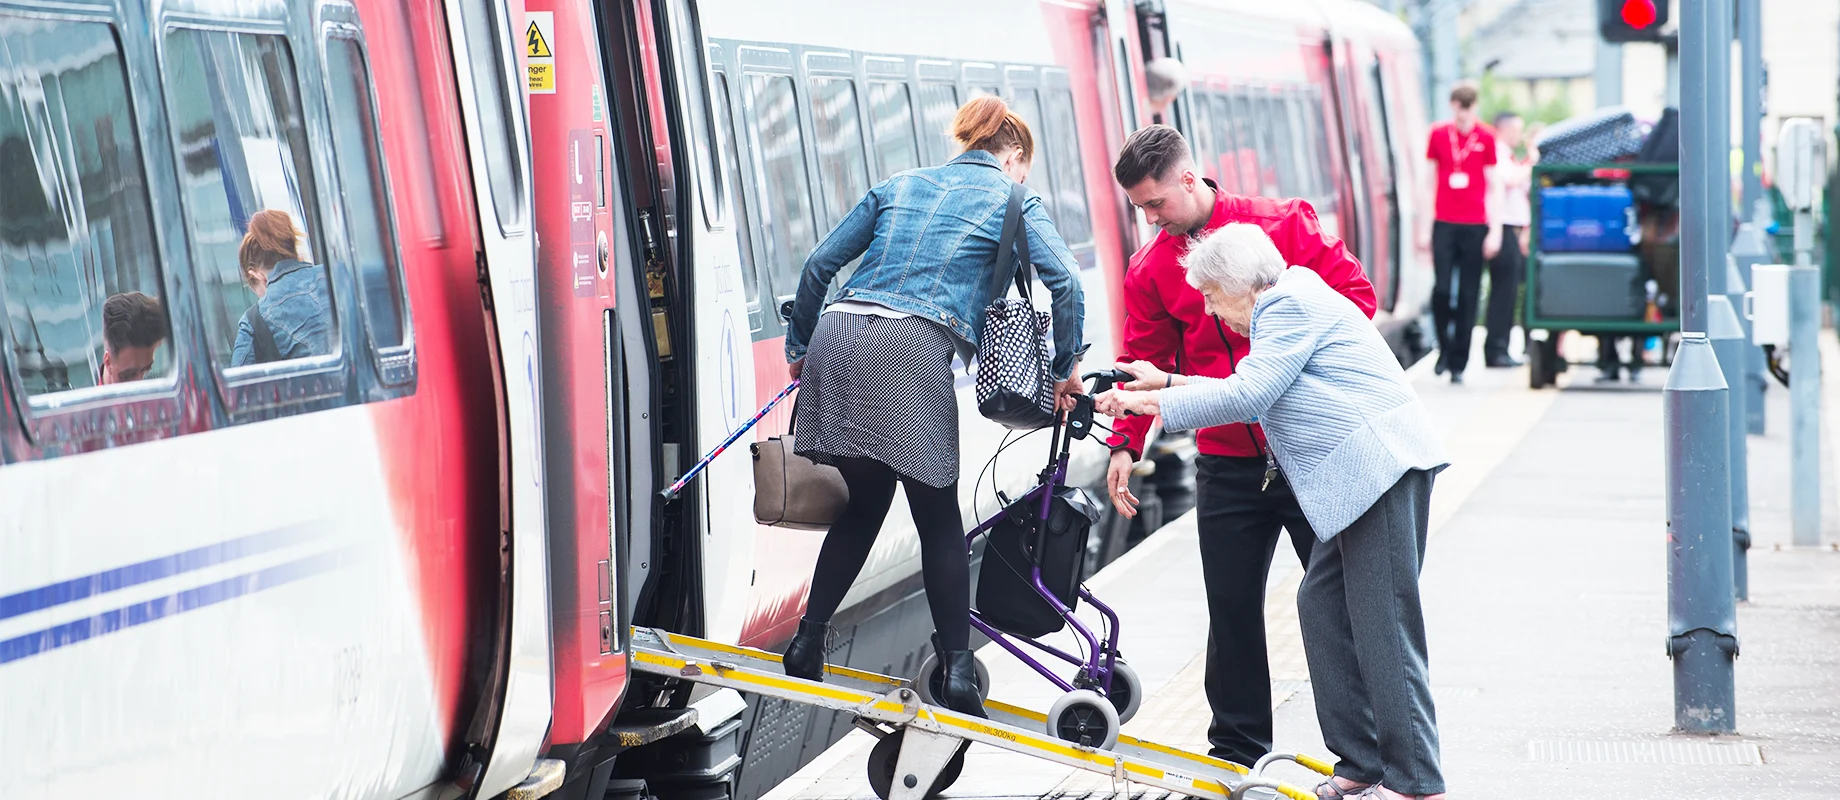 A railway employee helps an elderly woman using a wheeled walker up a ramp onto a train at a station platform, while a passenger guides the walker.